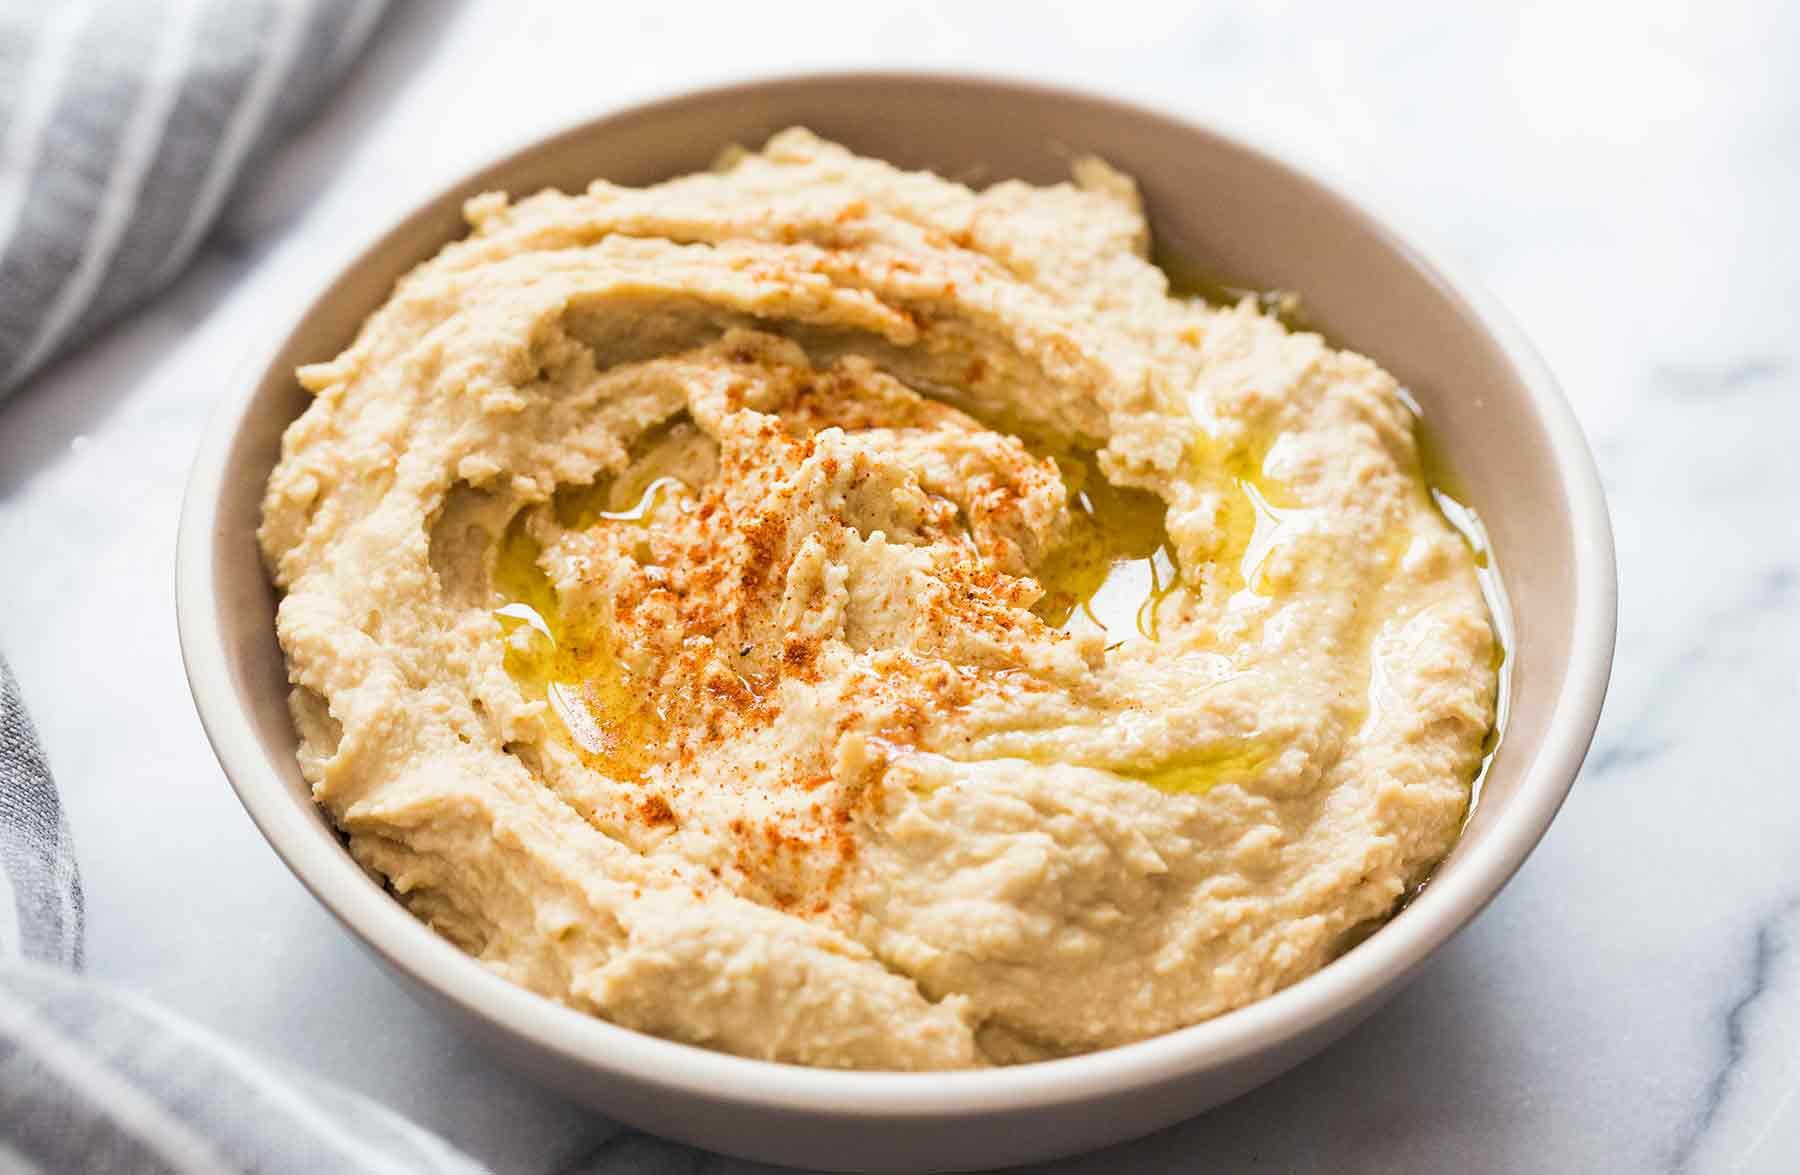 Got 5 minutes? Then You Have the Time to make Easy, Tasty Homemade Hummus